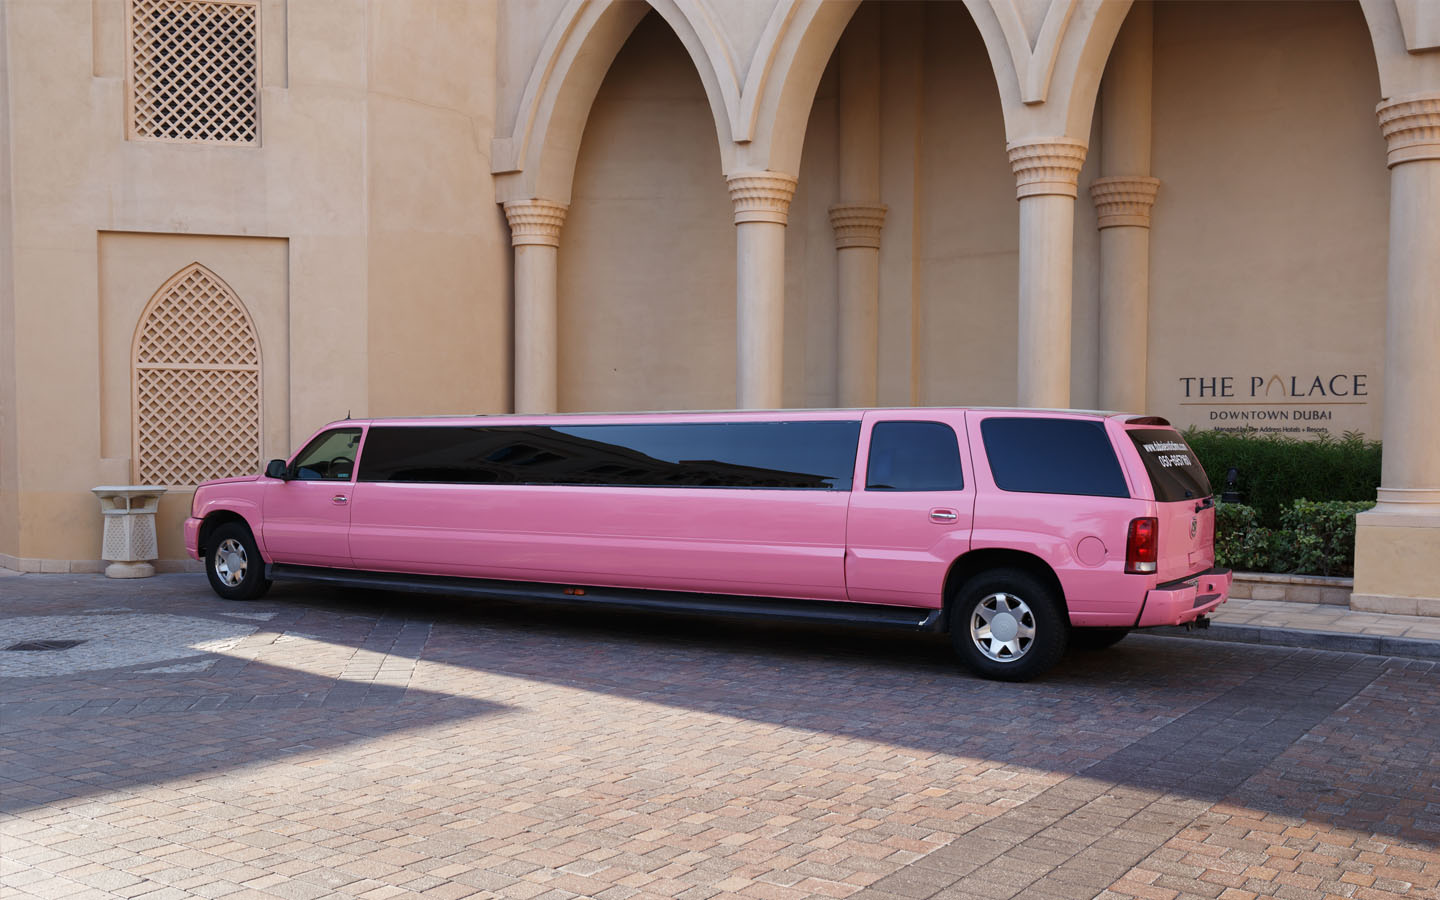 The Pink Limousine in the UAE